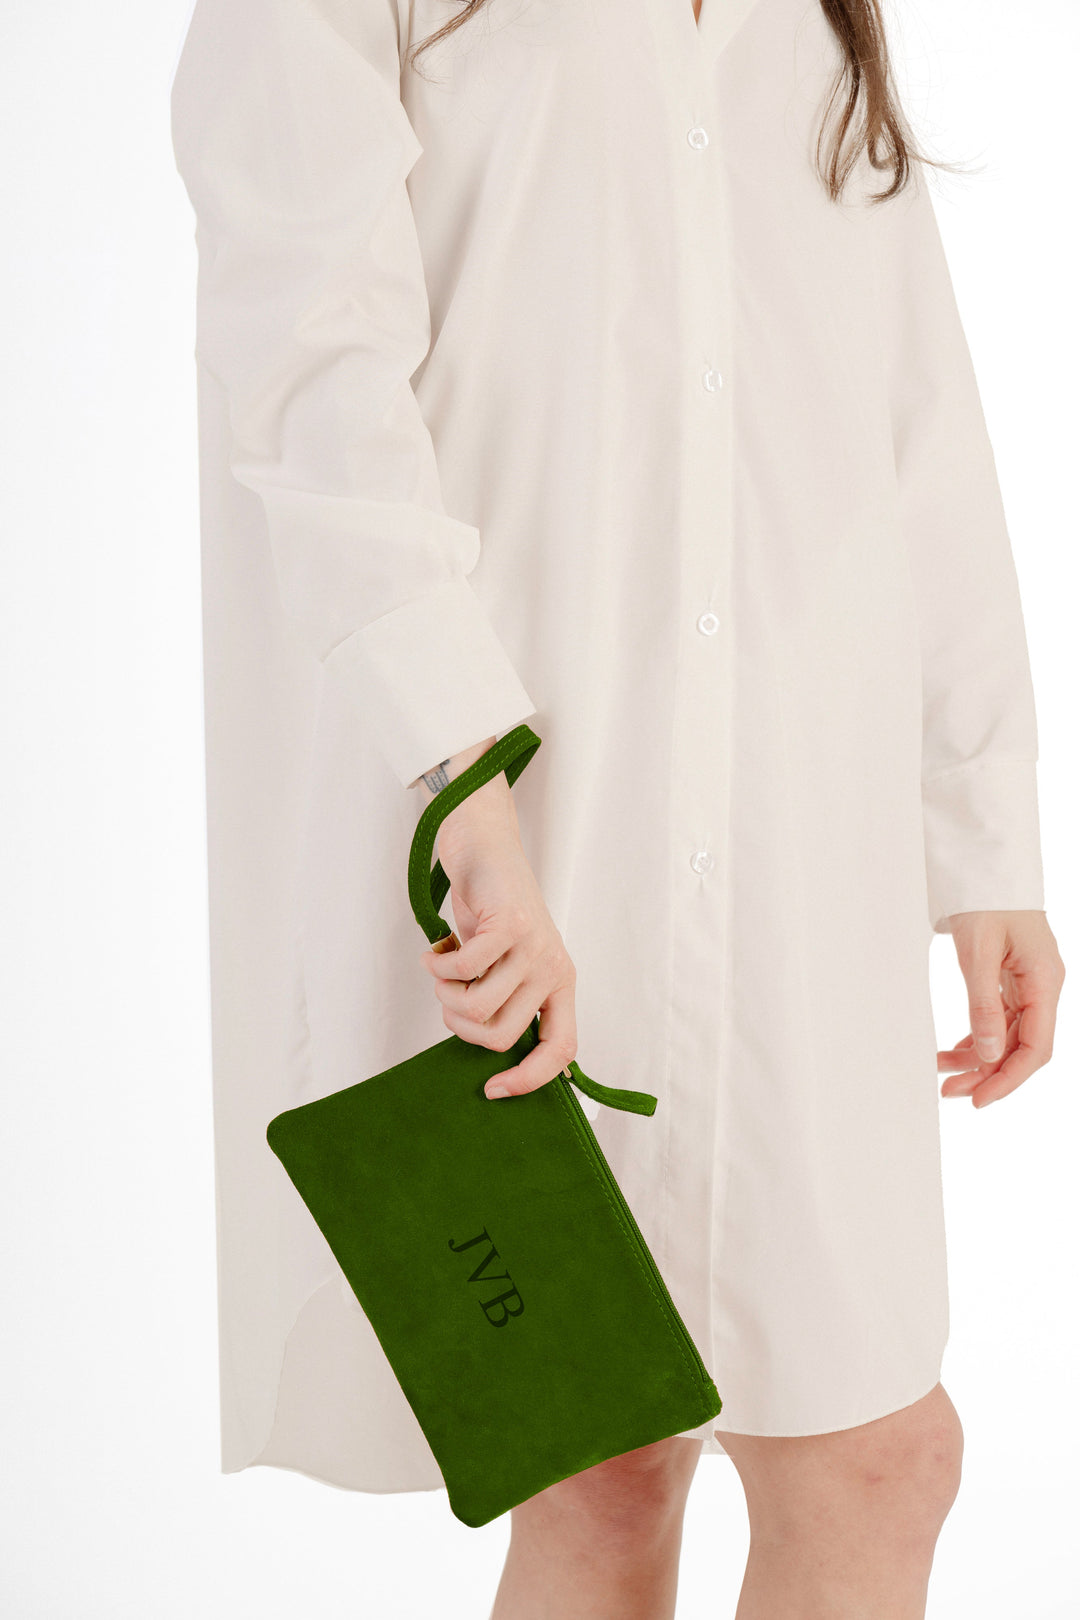 Woman holding a green suede clutch against a white dress